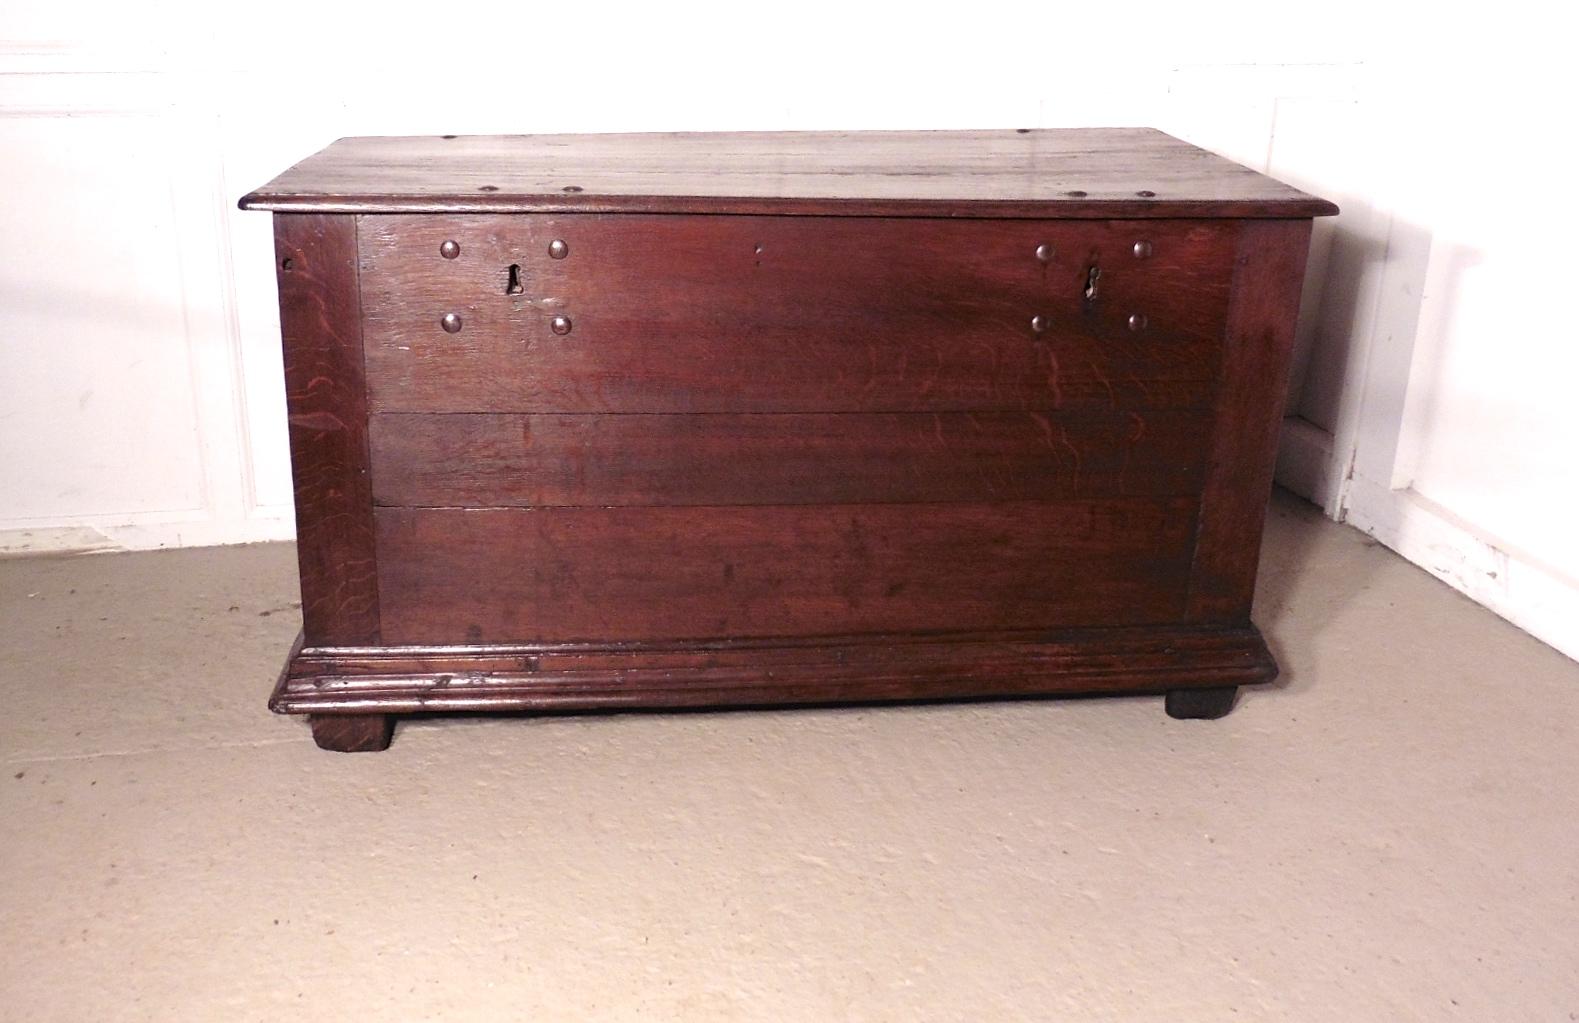 A heavy rustic oak coffer

This is a very solid and heavy piece it is made from solid oak, the chest has 2 Iron locks the front sadly we do not have the key
The top of the box is planked and has moulded edge and it has a candle box inside
This